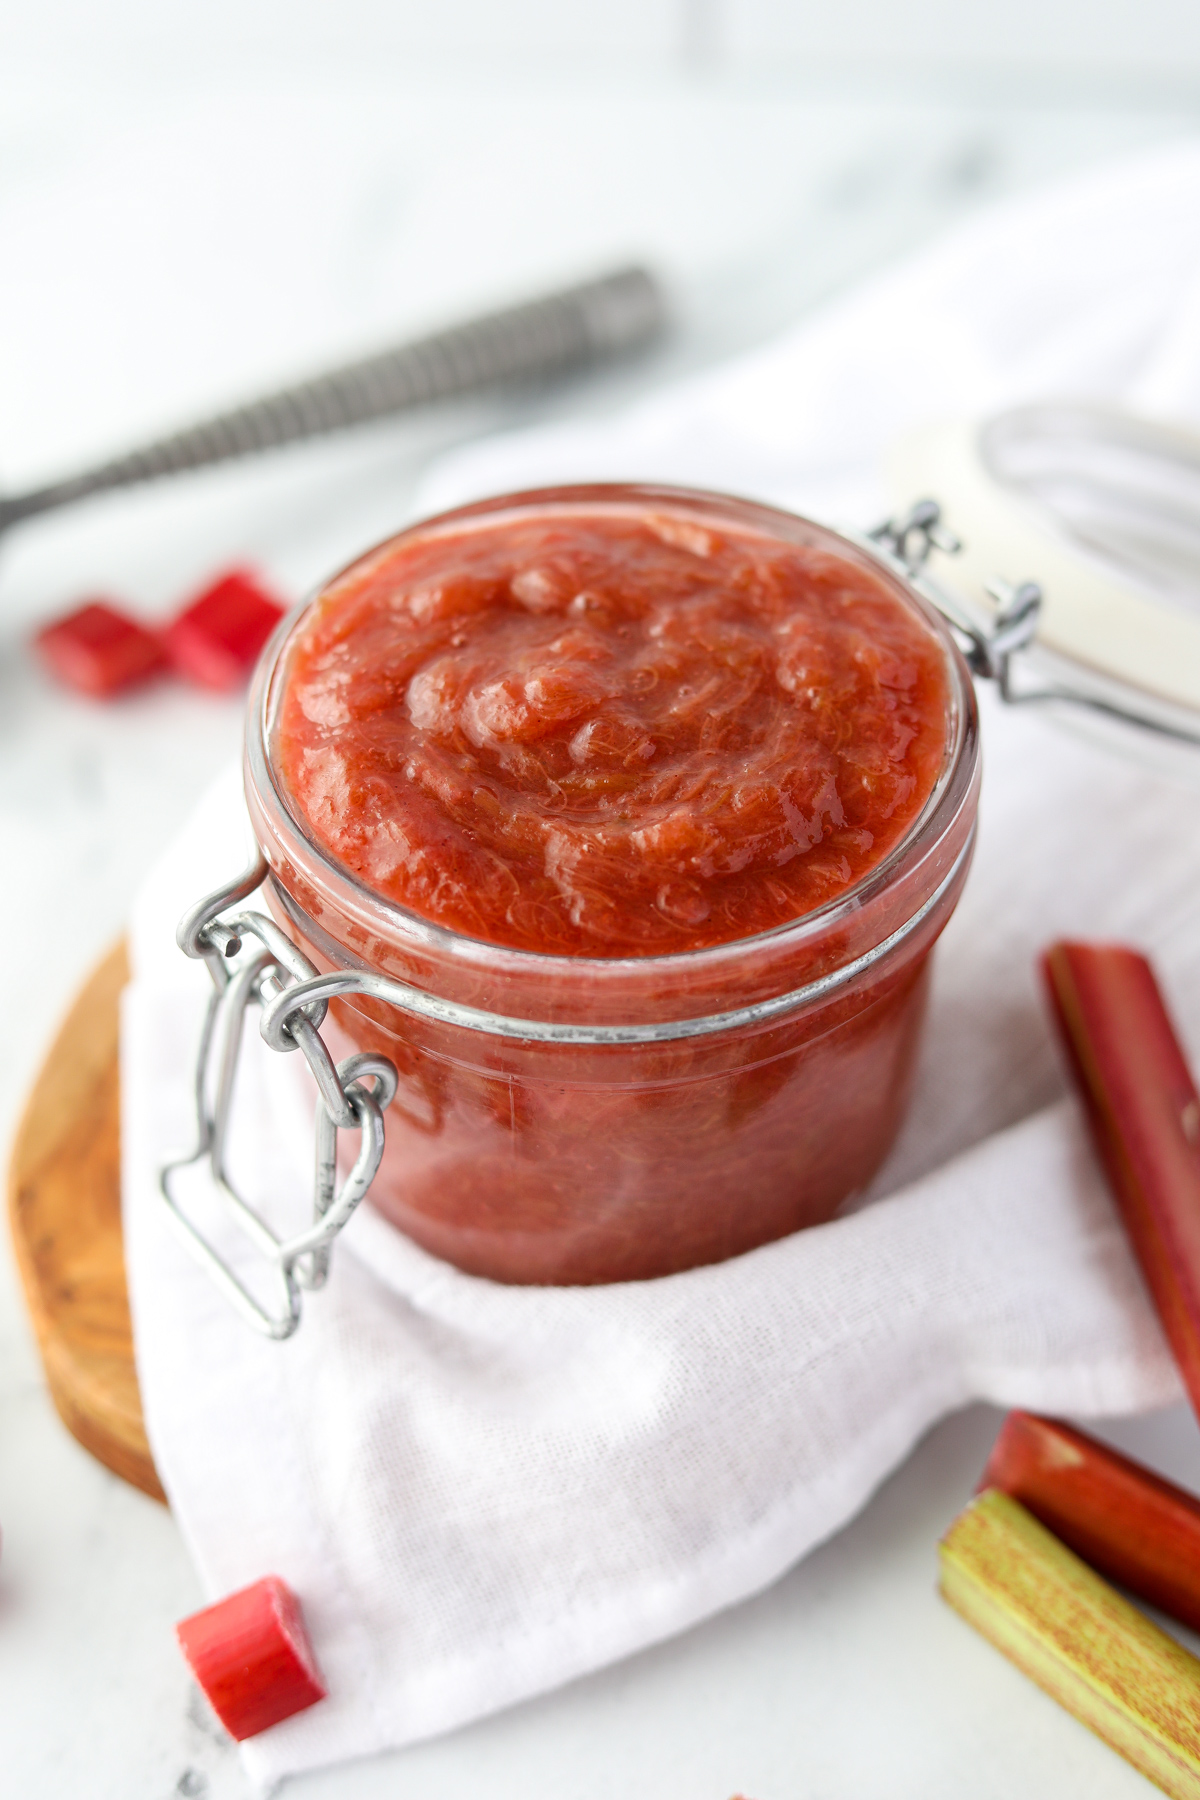 A small jar filled with rhubarb sauce resting on a wood board.